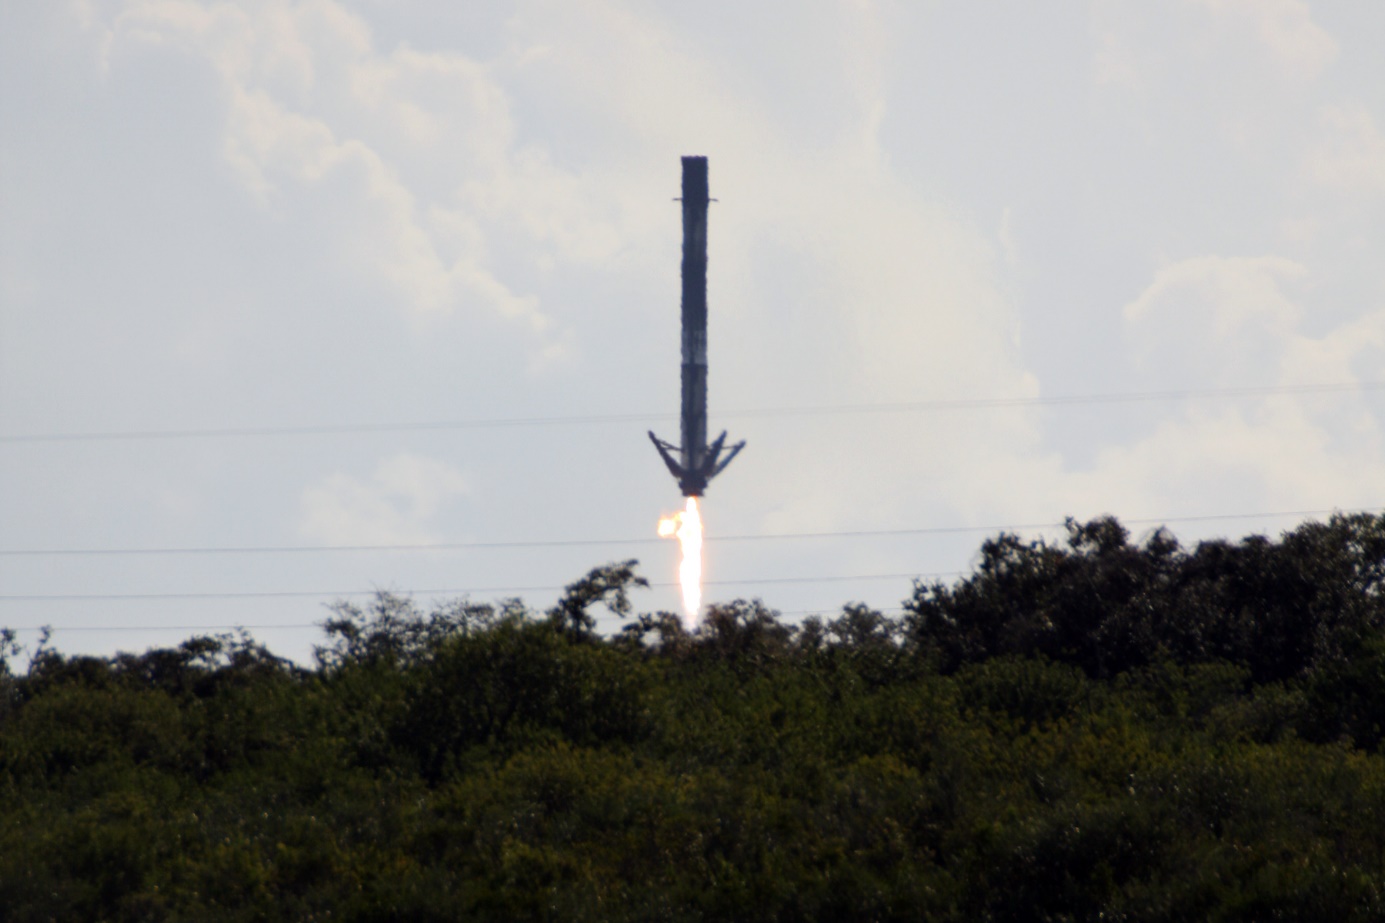 Falcon 9 First Stage Approaches Landing, Photo Courtesy Carleton Bailie-Spaceline